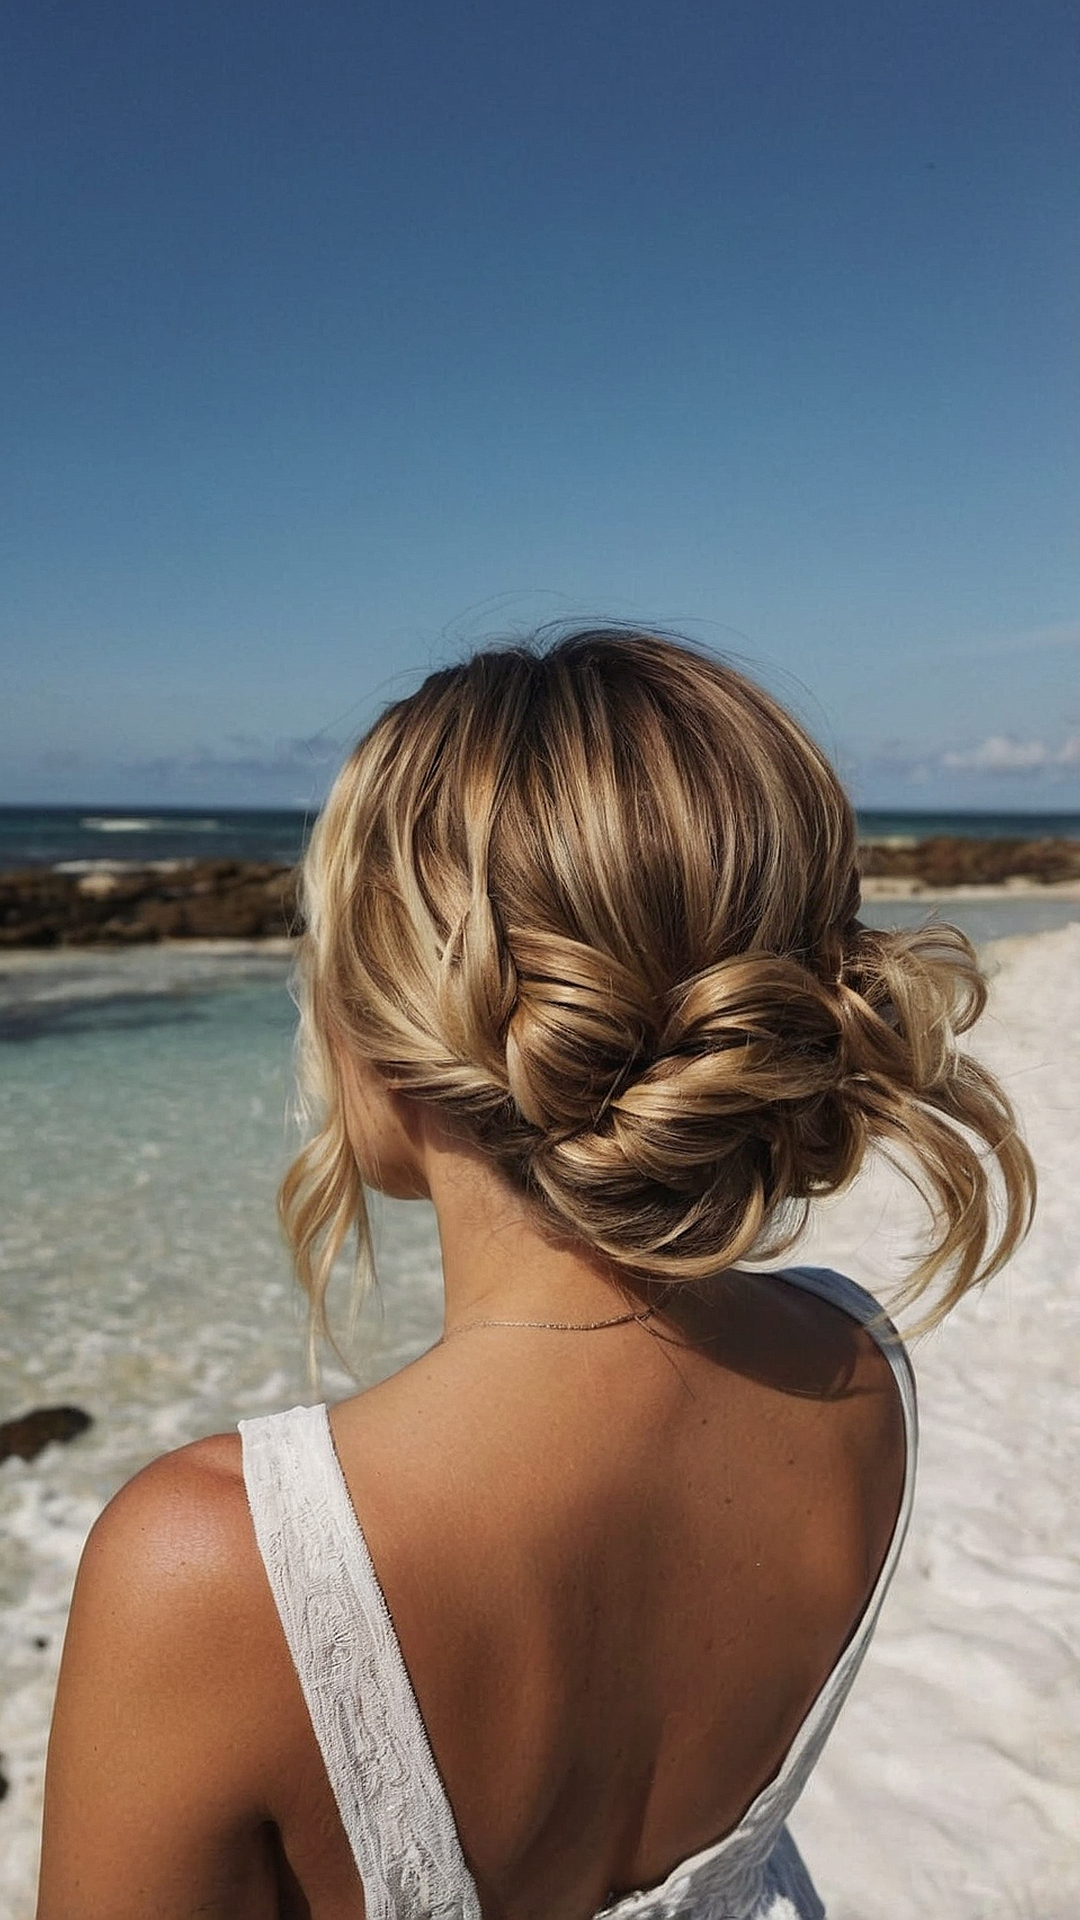 Summer Chic: Trendy Hairstyles for the Season